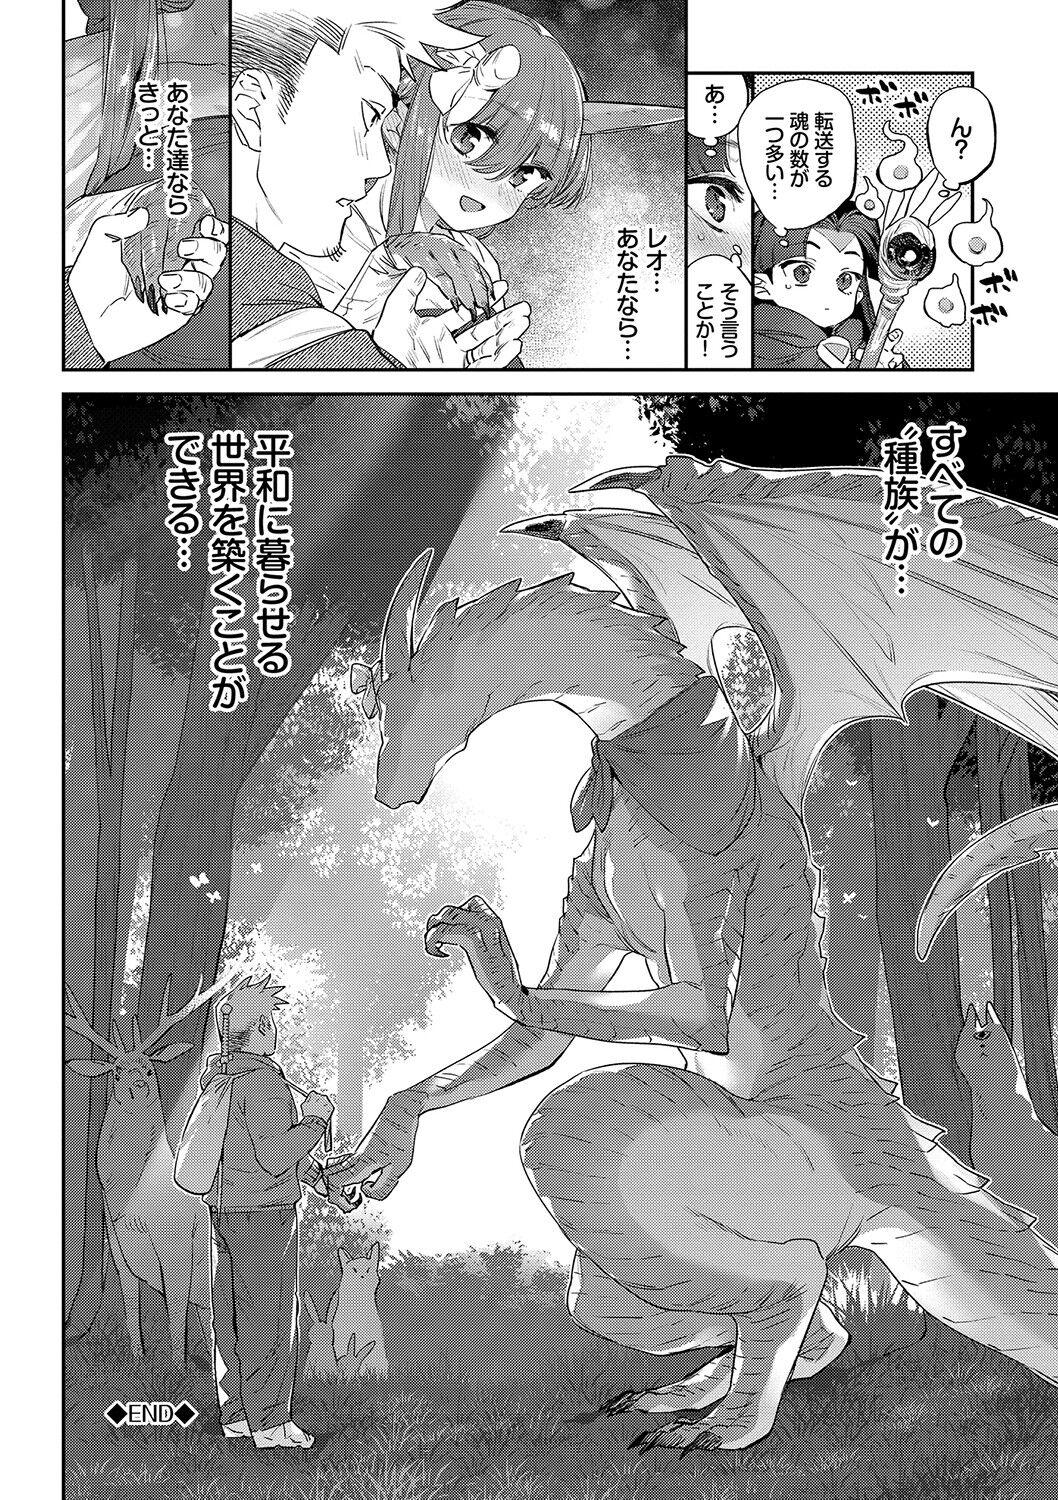 Ihou no Otome - Monster Girls in Another World 224